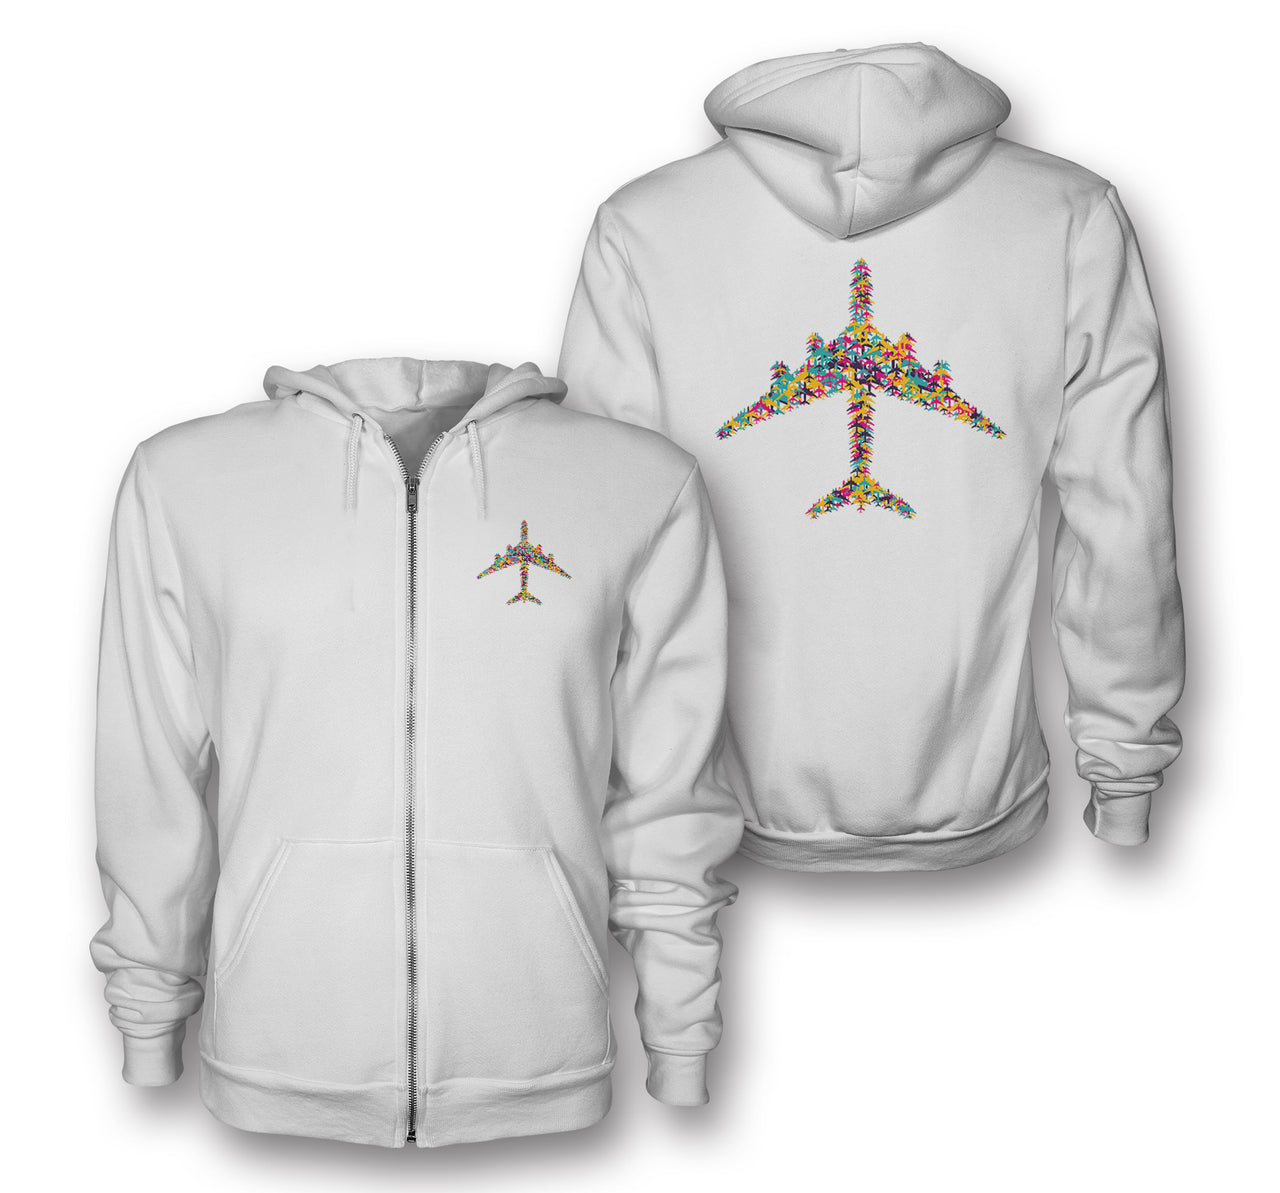 Colourful Airplane Designed Zipped Hoodies